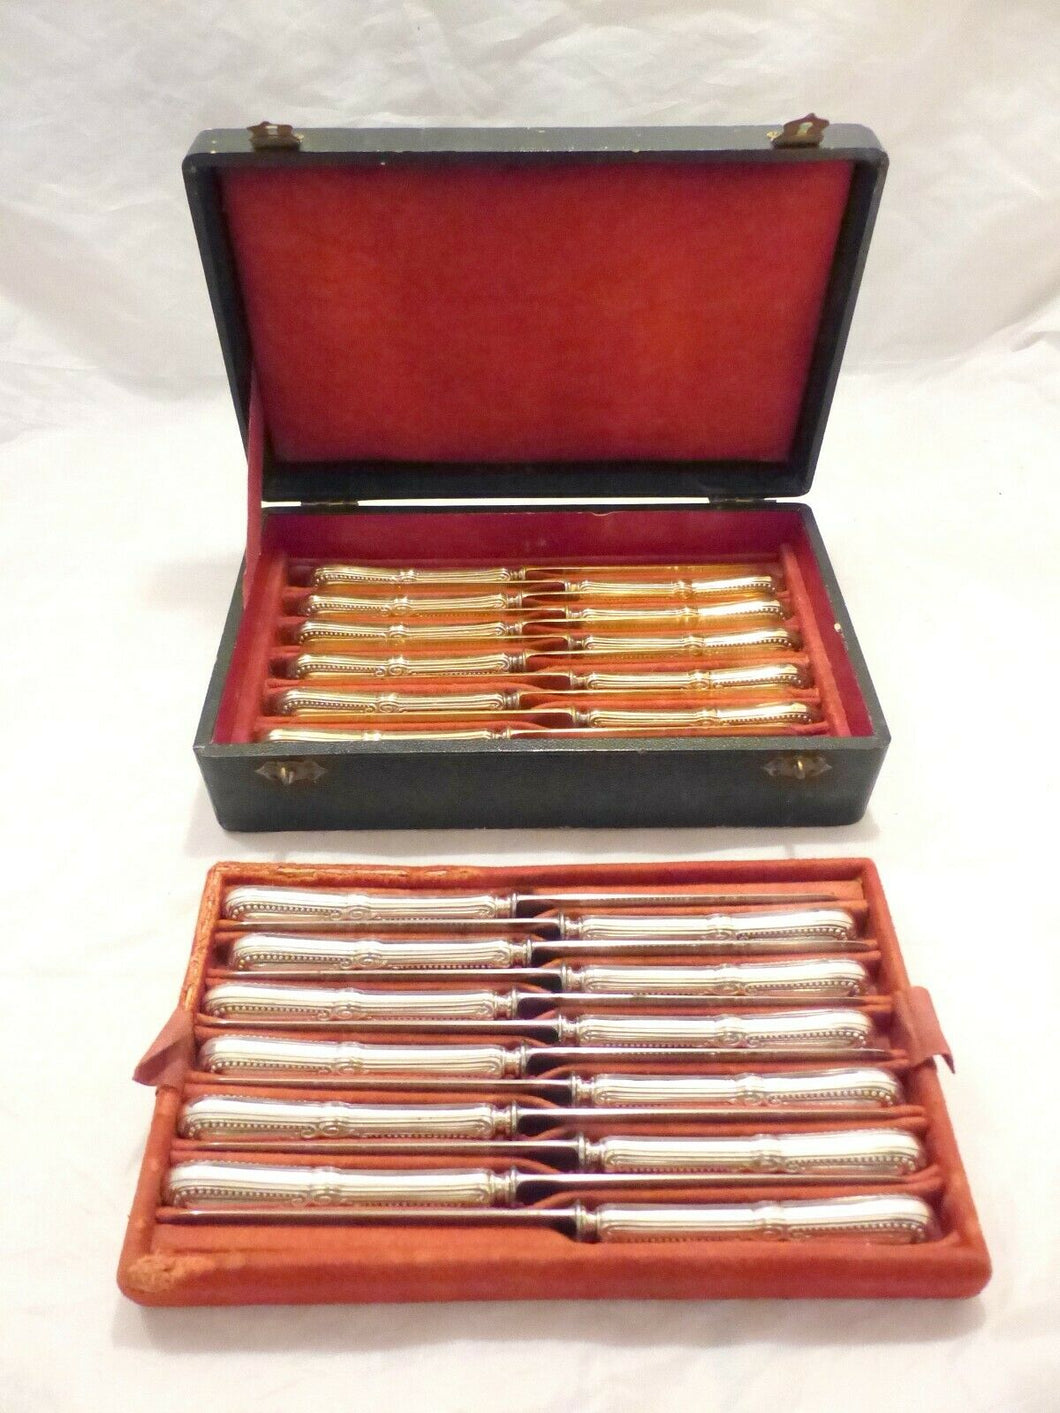 CHRISTOFLE OMG Rare set 24 French Dessert Fruits knives Silver & Gold plated BOX